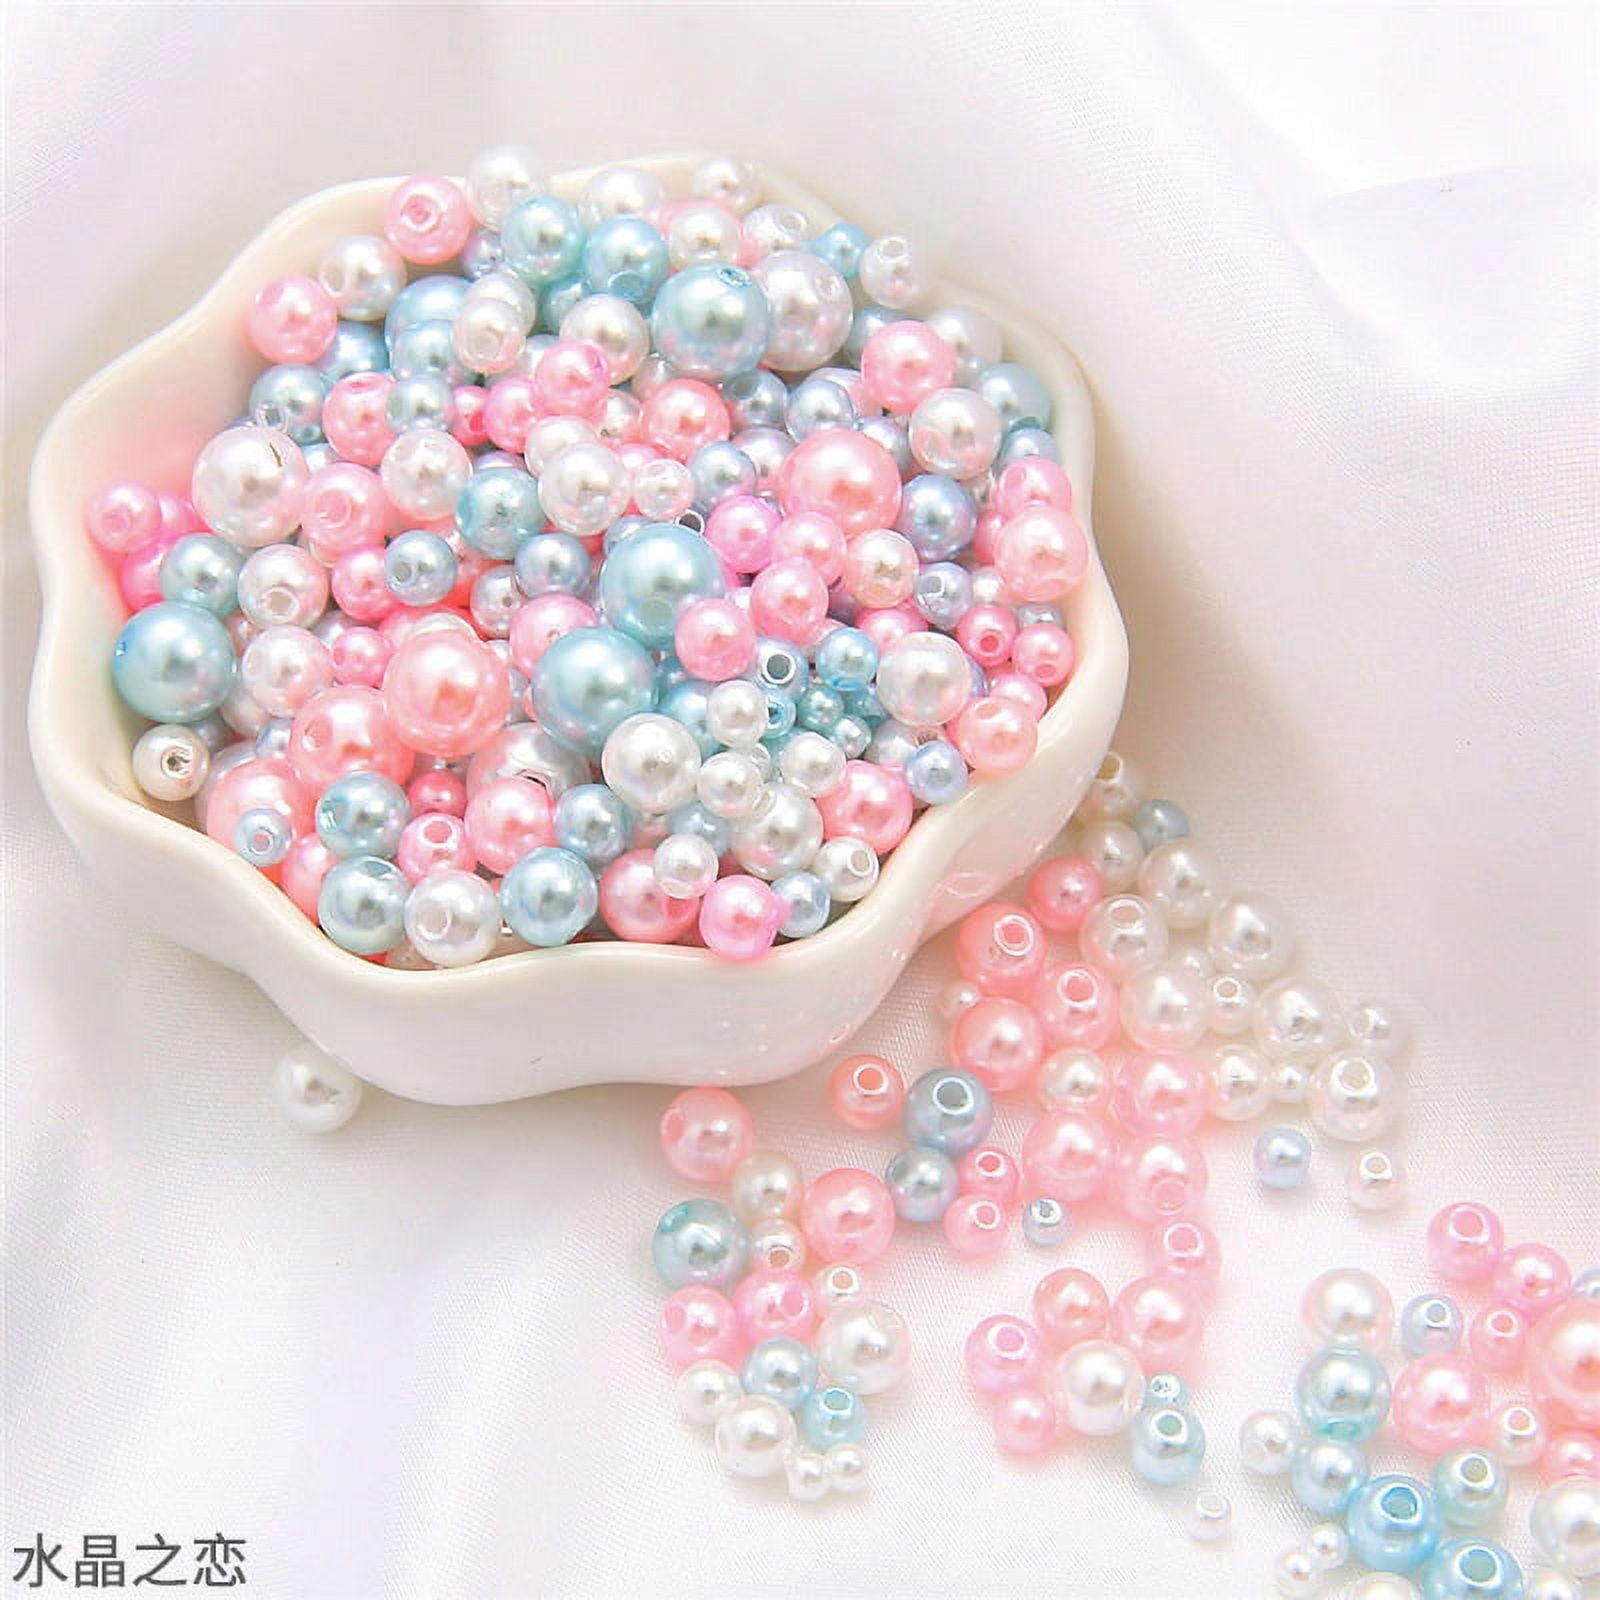 720 Pieces of Pearl Beads for Crafts, 8MM Round Pearls Beads with Holes for  Jewelry Making Handcrafted Loose Spacer Beads for DIY Crafts Jewelry